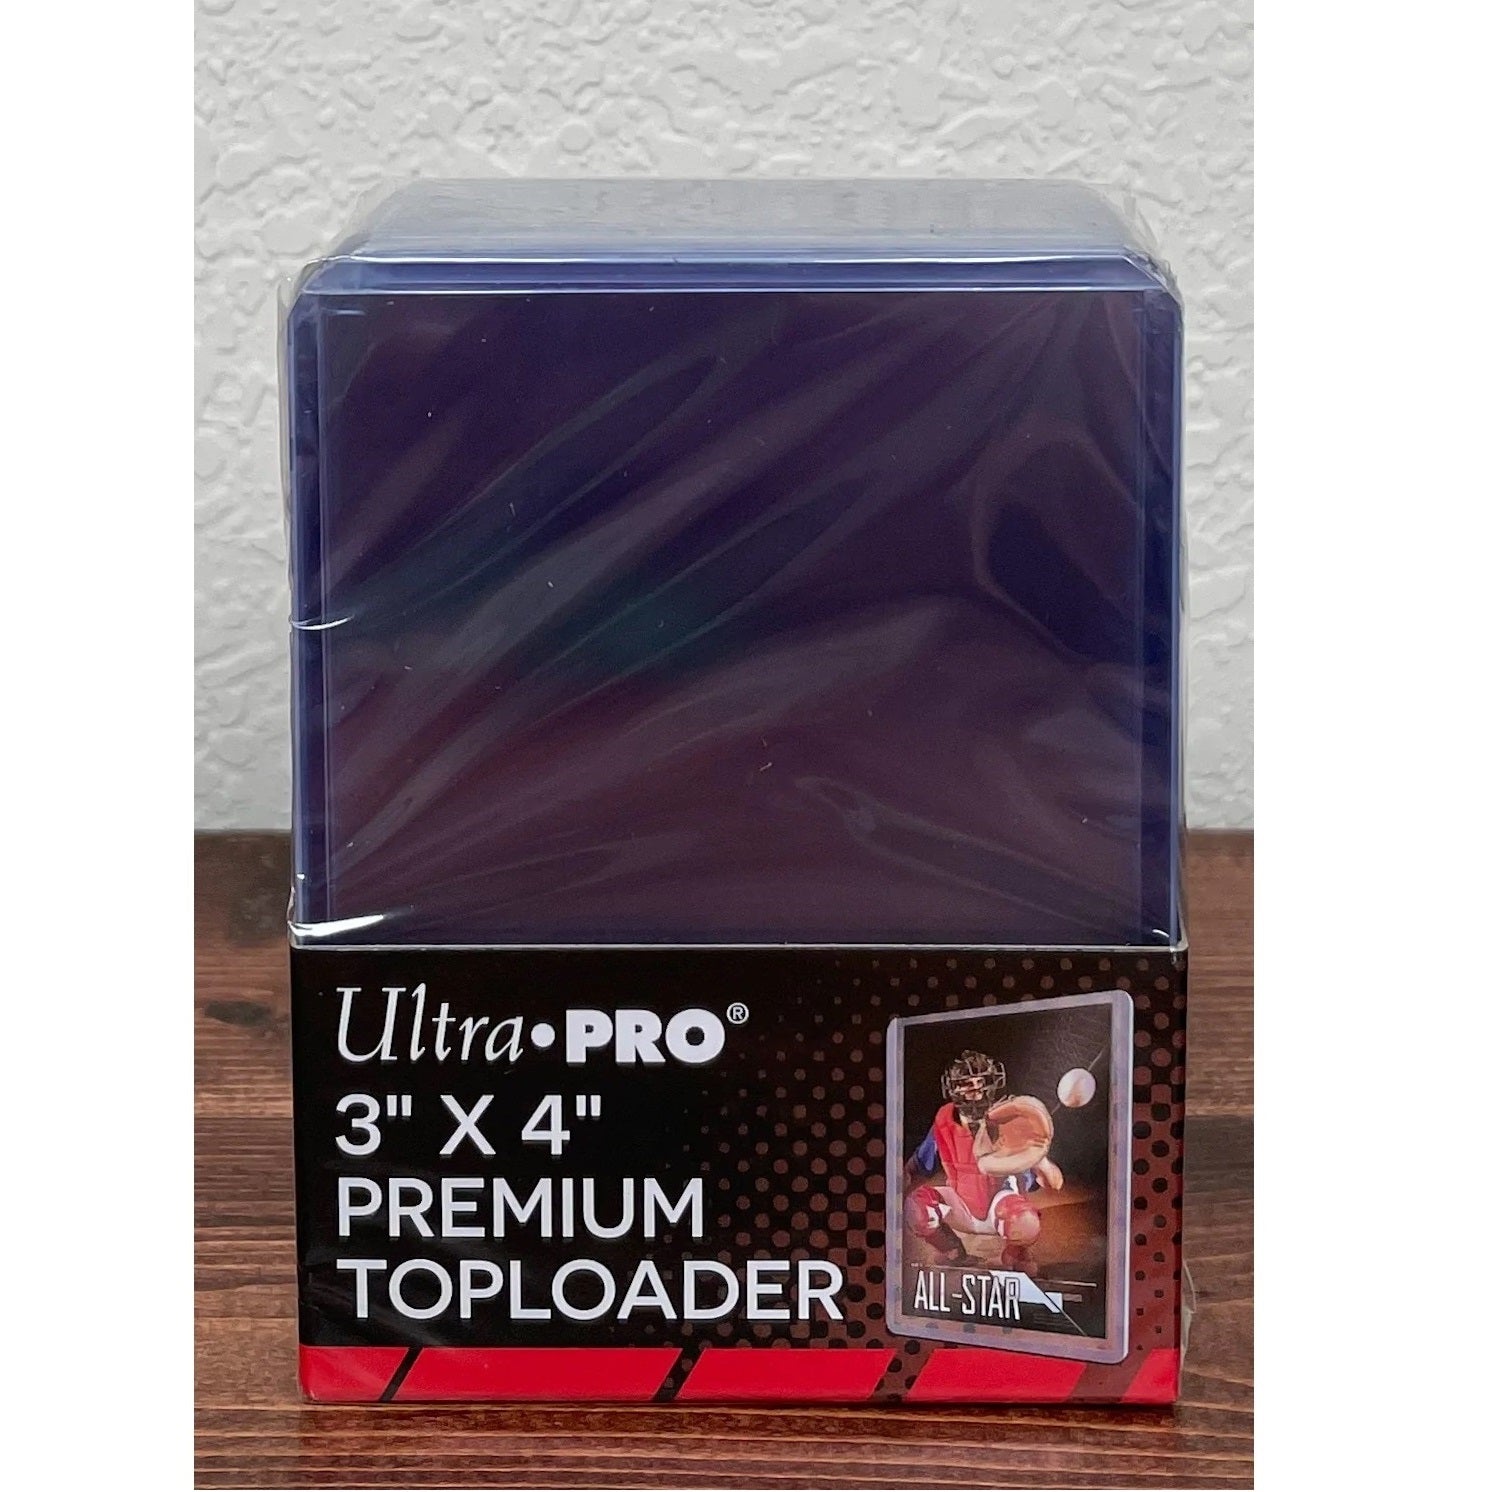 Ultra PRO Toploader 3" x 4" (Premium Clear)-Ultra PRO-Ace Cards & Collectibles